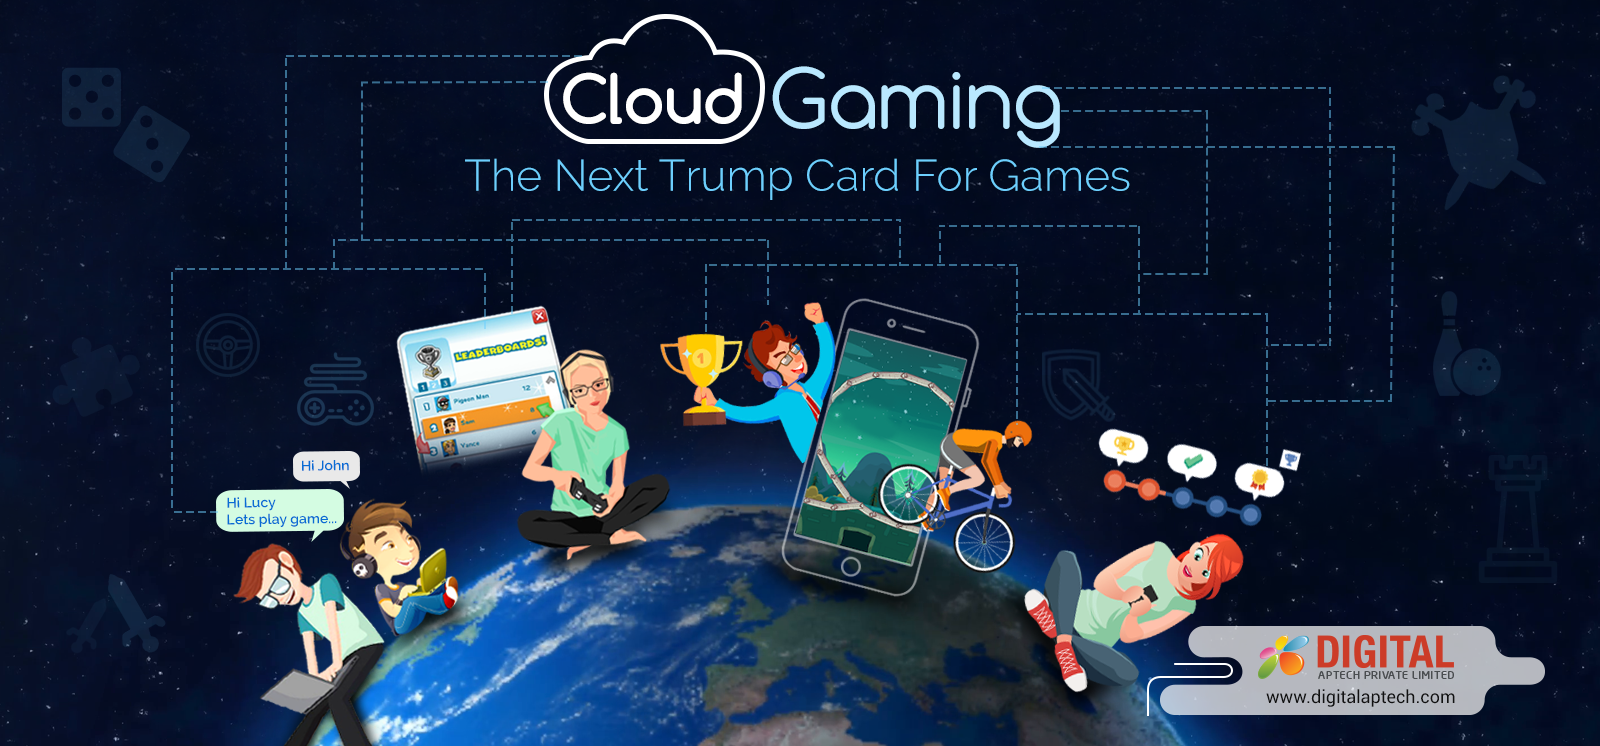 Is Cloud Gaming Really the Future of the Gaming Industry?